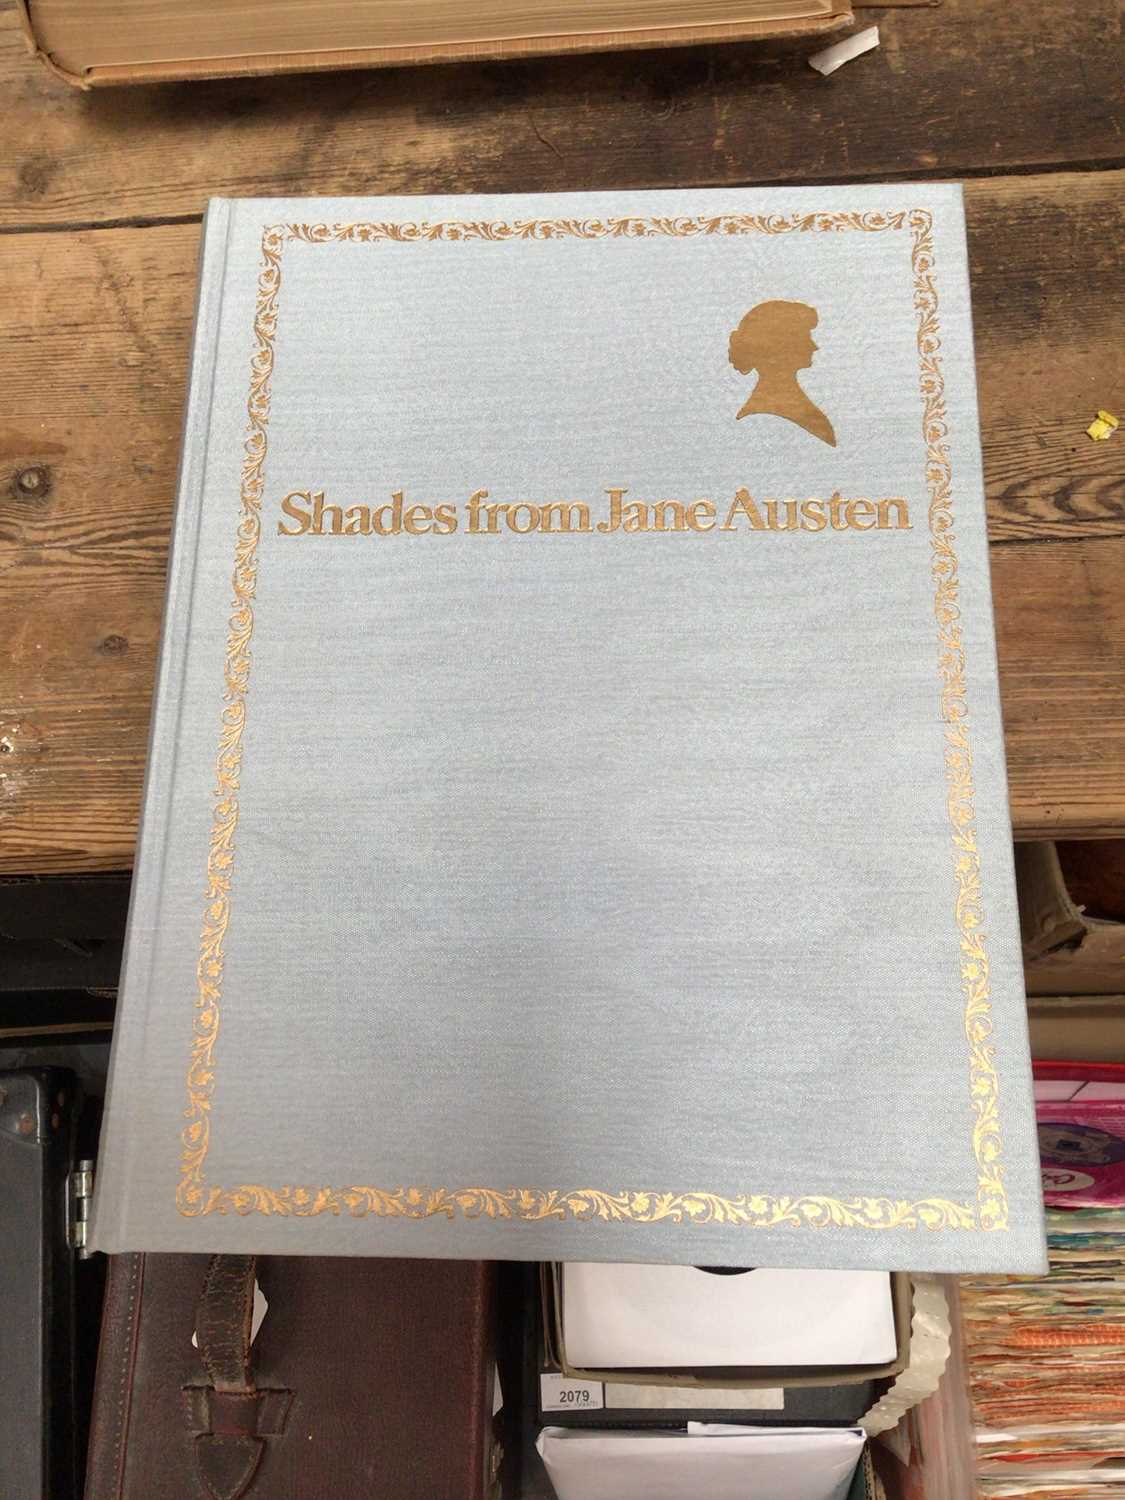 Shades from Jane Austen by Honoria D. Marks, from a limited edition of 1000 and signed by the author - Image 2 of 4